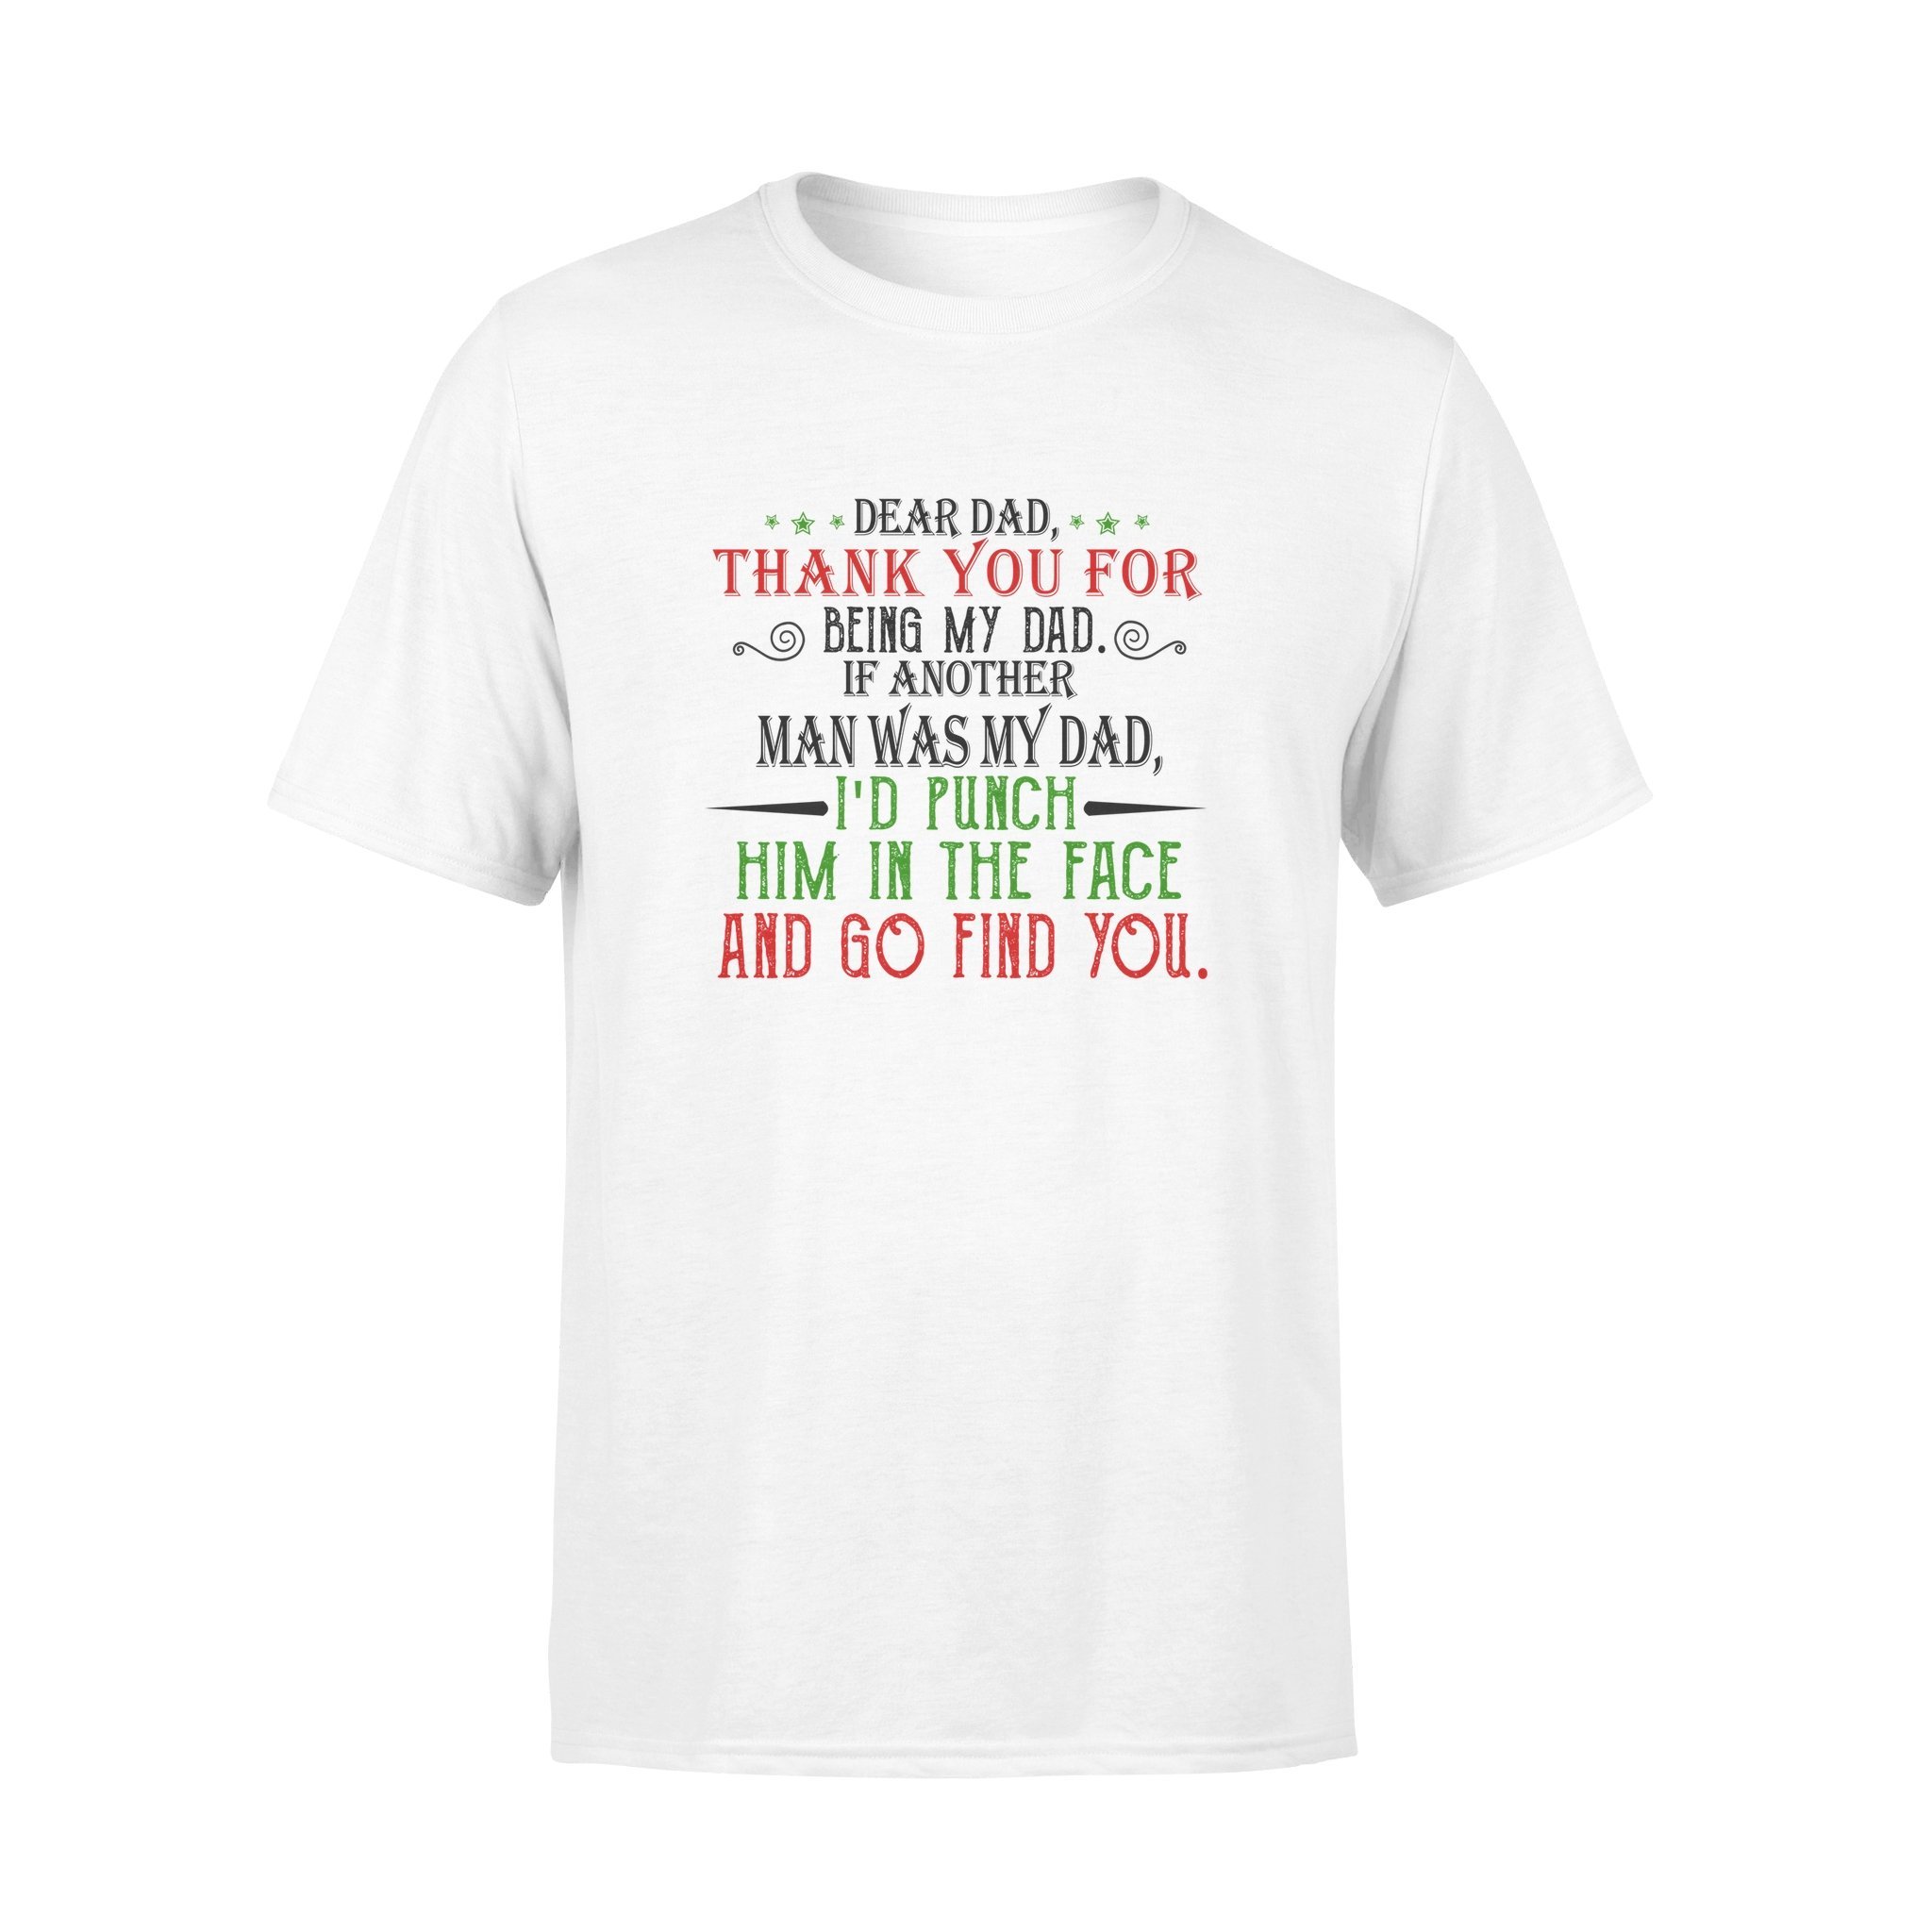 Meaningful T-shirt for dads – Gifts for dads, gift for dad, presents for dad, Christmas gift for dad, meaningful gift for dad